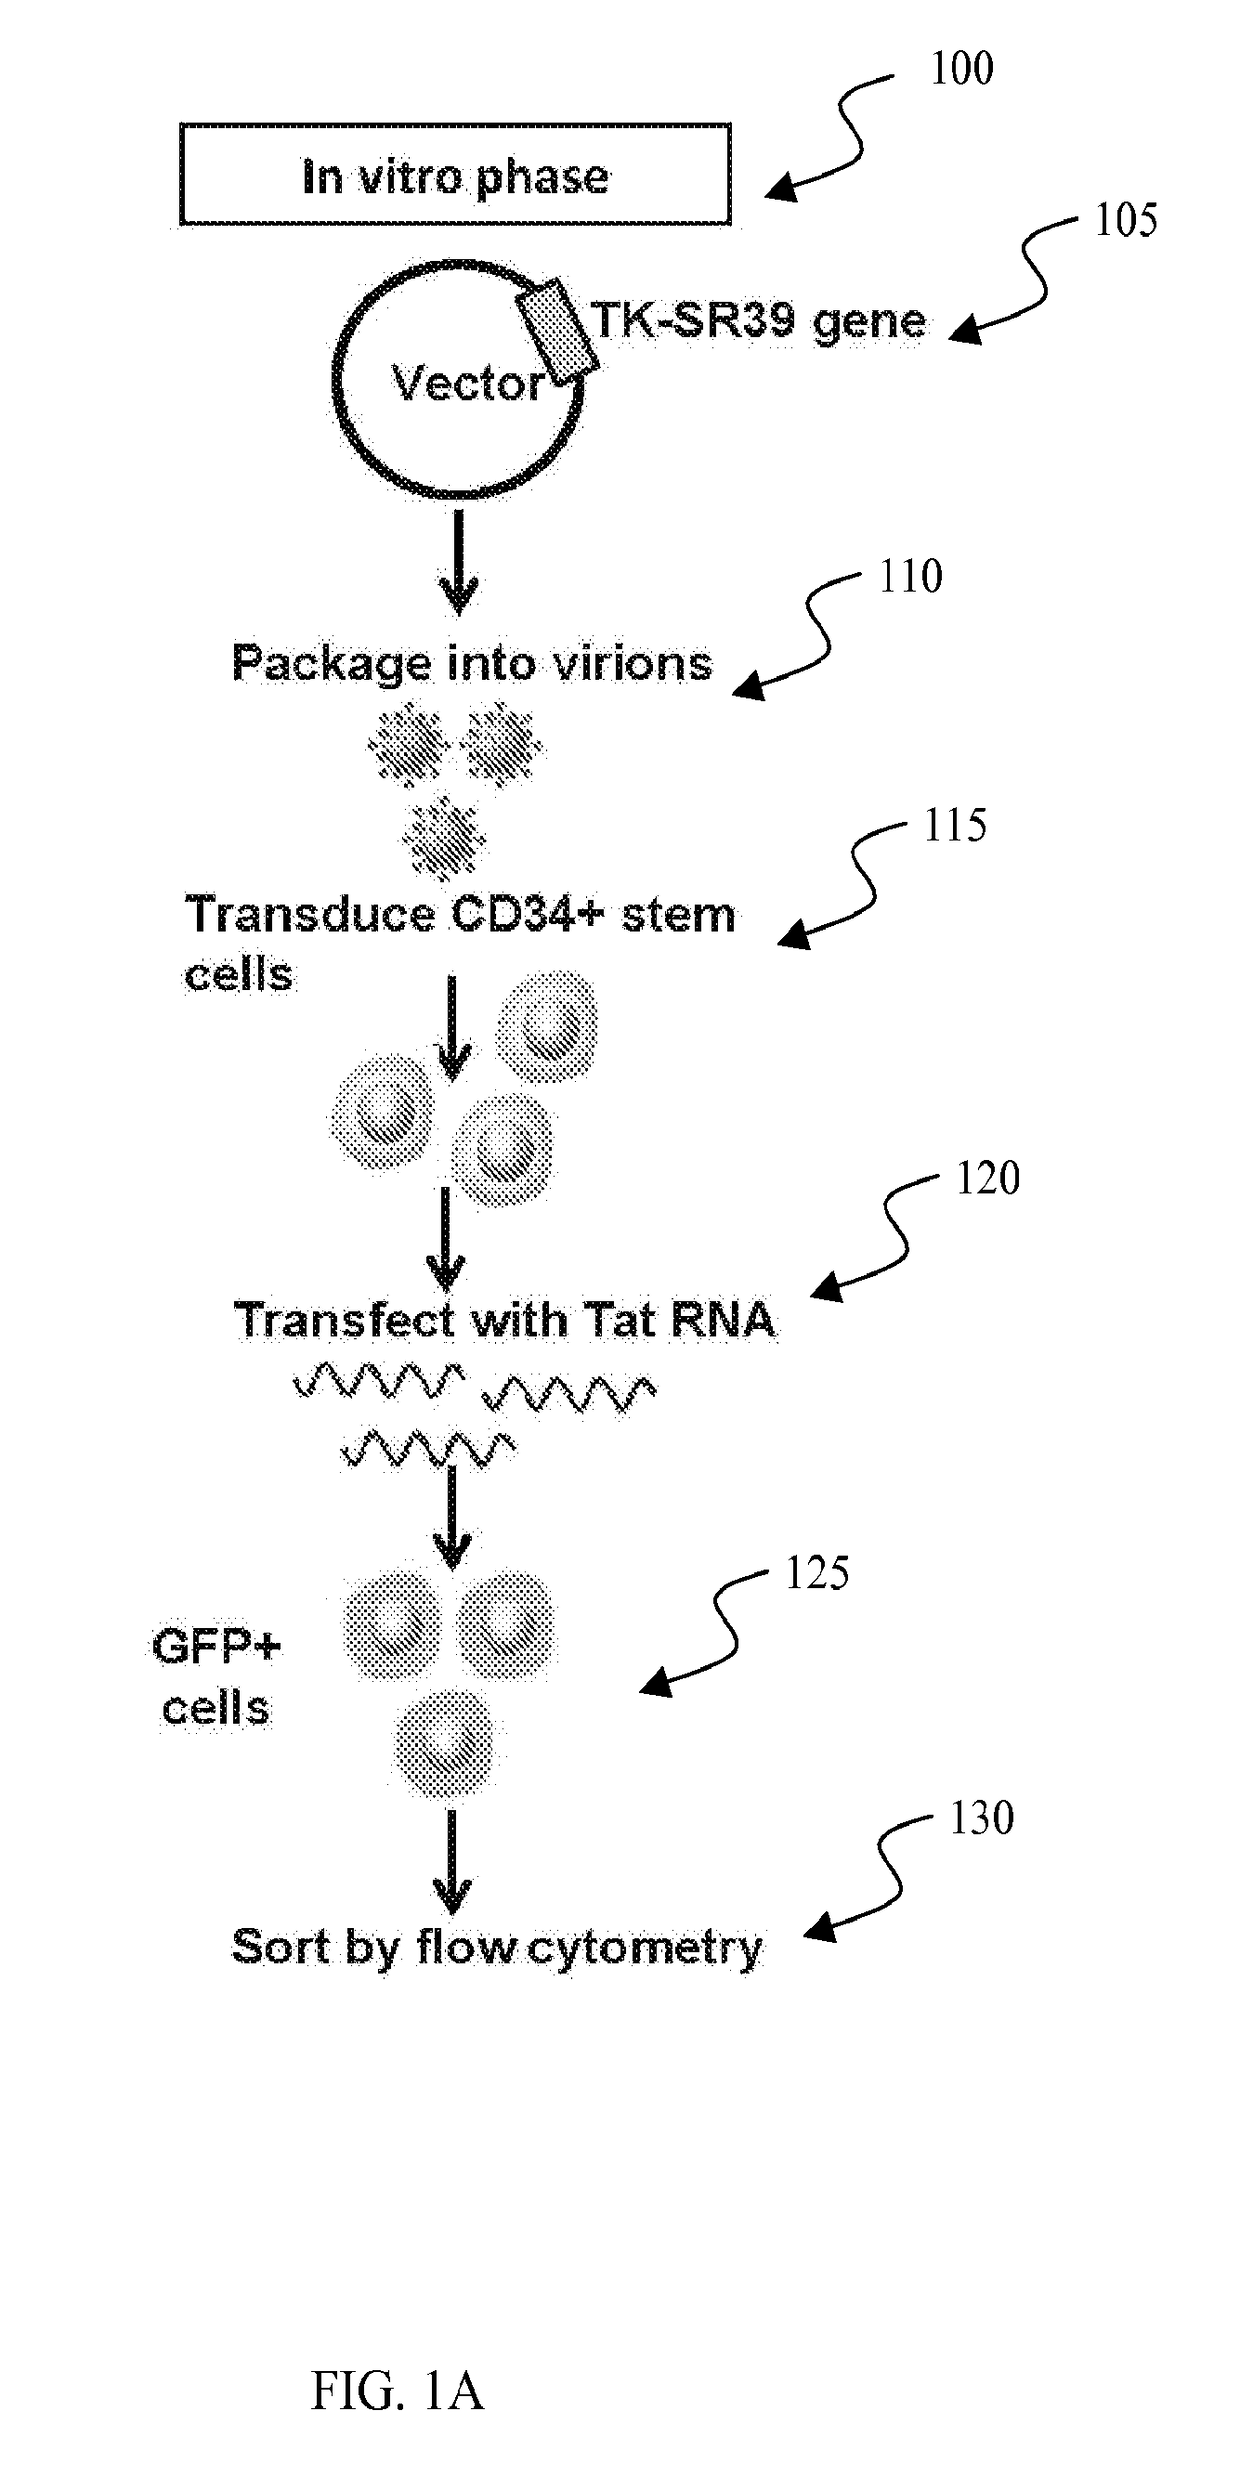 Conditional cytotoxic gene therapy vector for selectable stem cell modification for anti HIV gene therapy